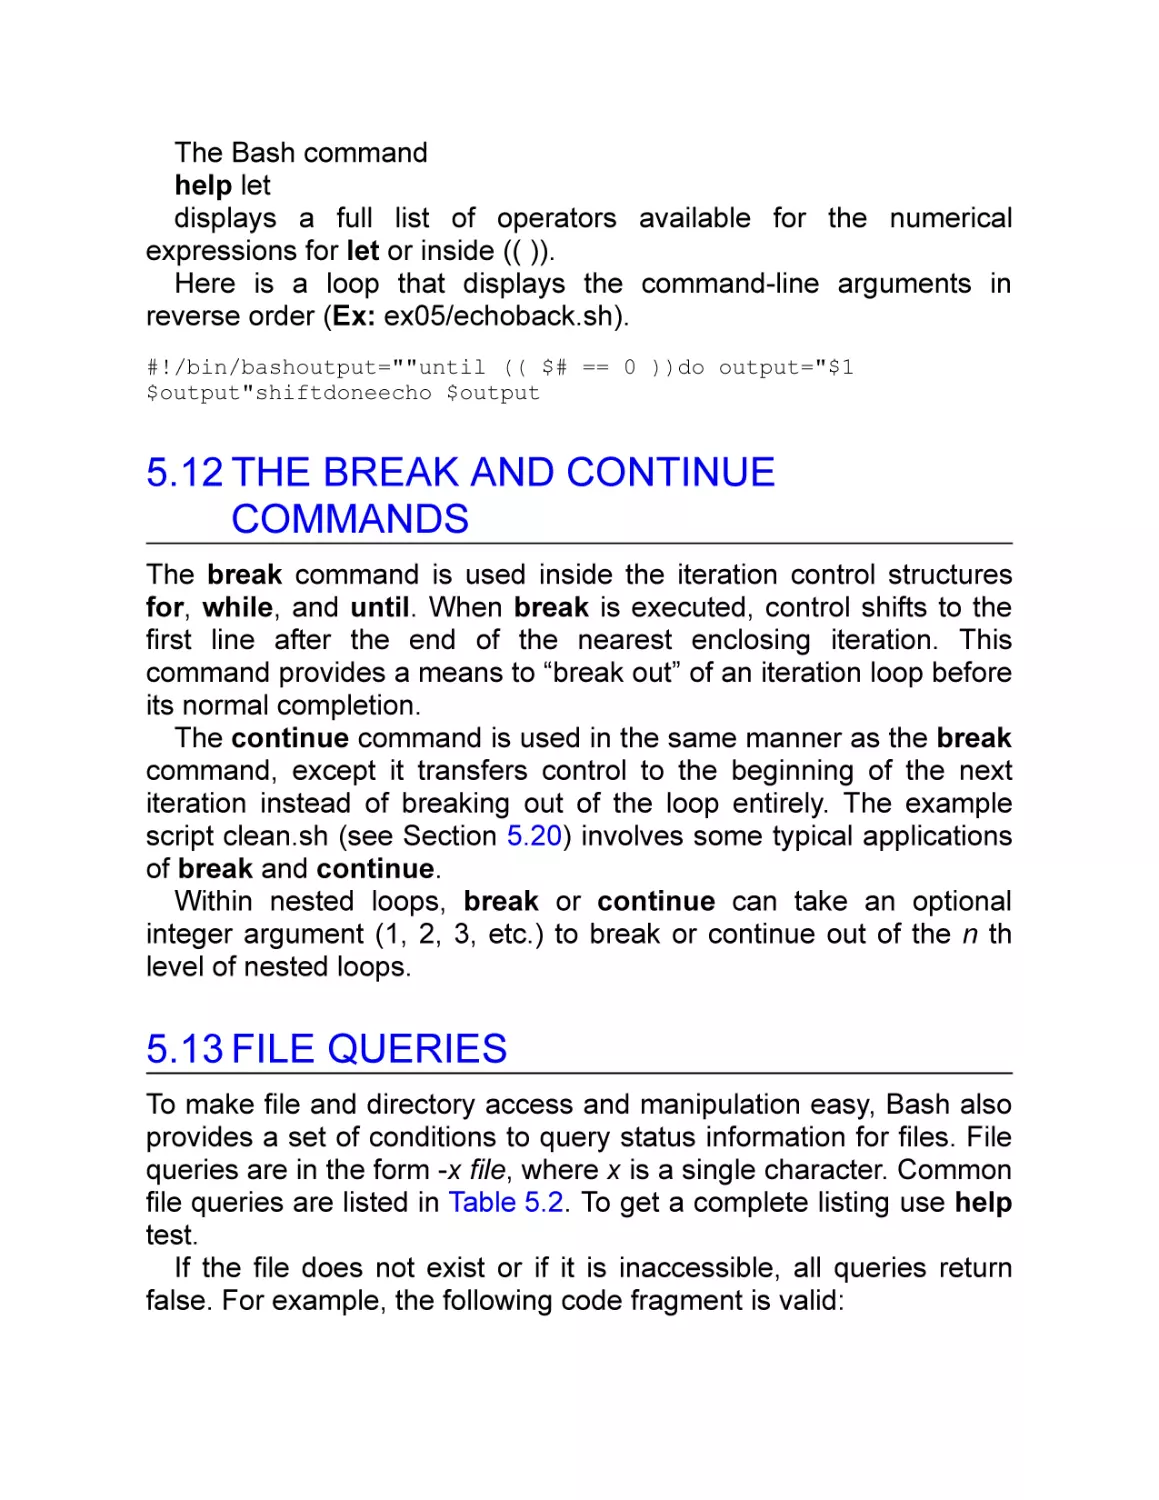 5.12 The break and continue Commands
5.13 File Queries